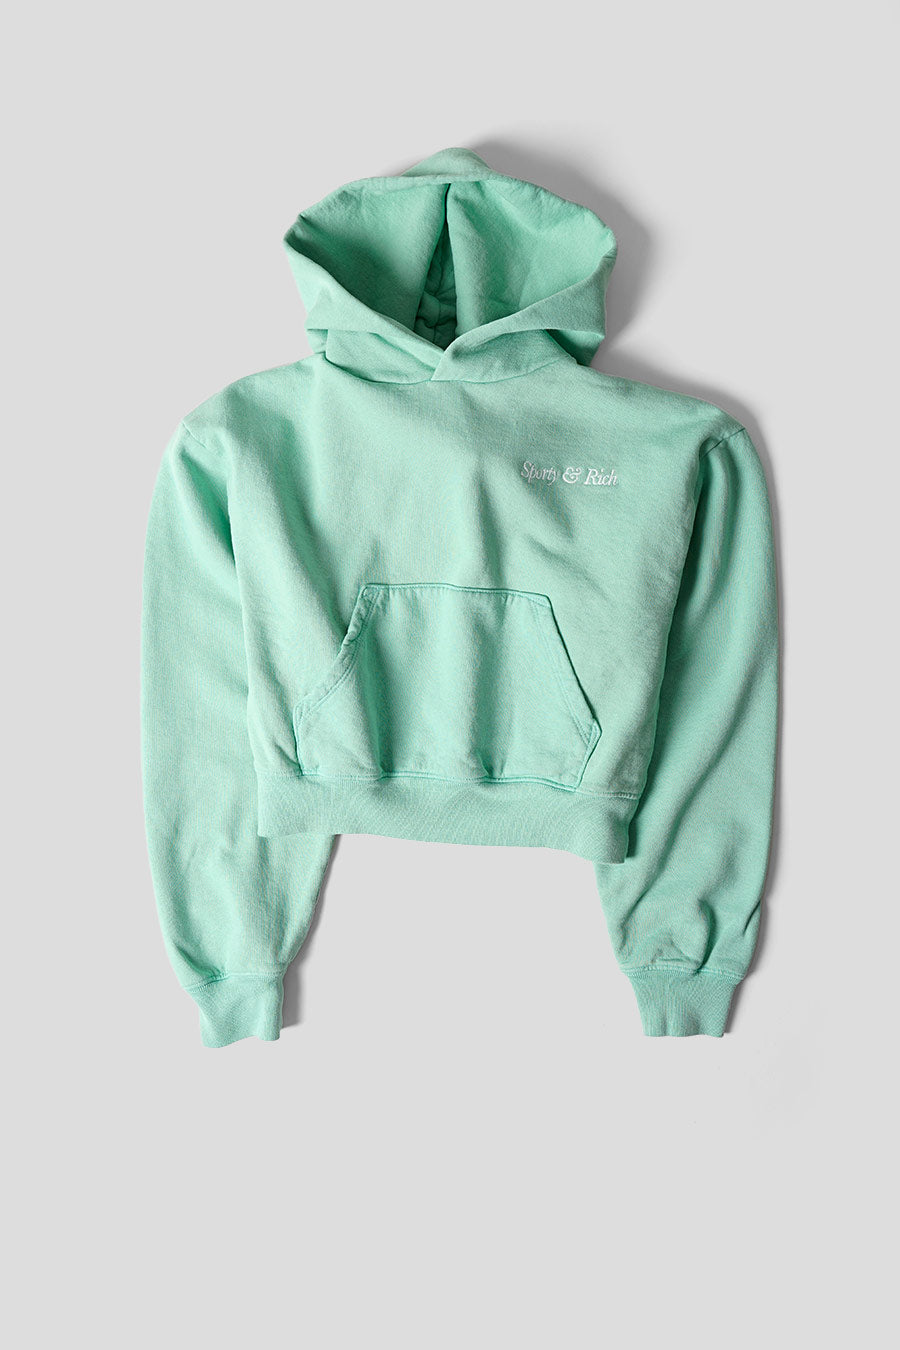 Sporty & Rich - HOODIE CROPPED ITALIC LOGO JADE - LE LABO STORE